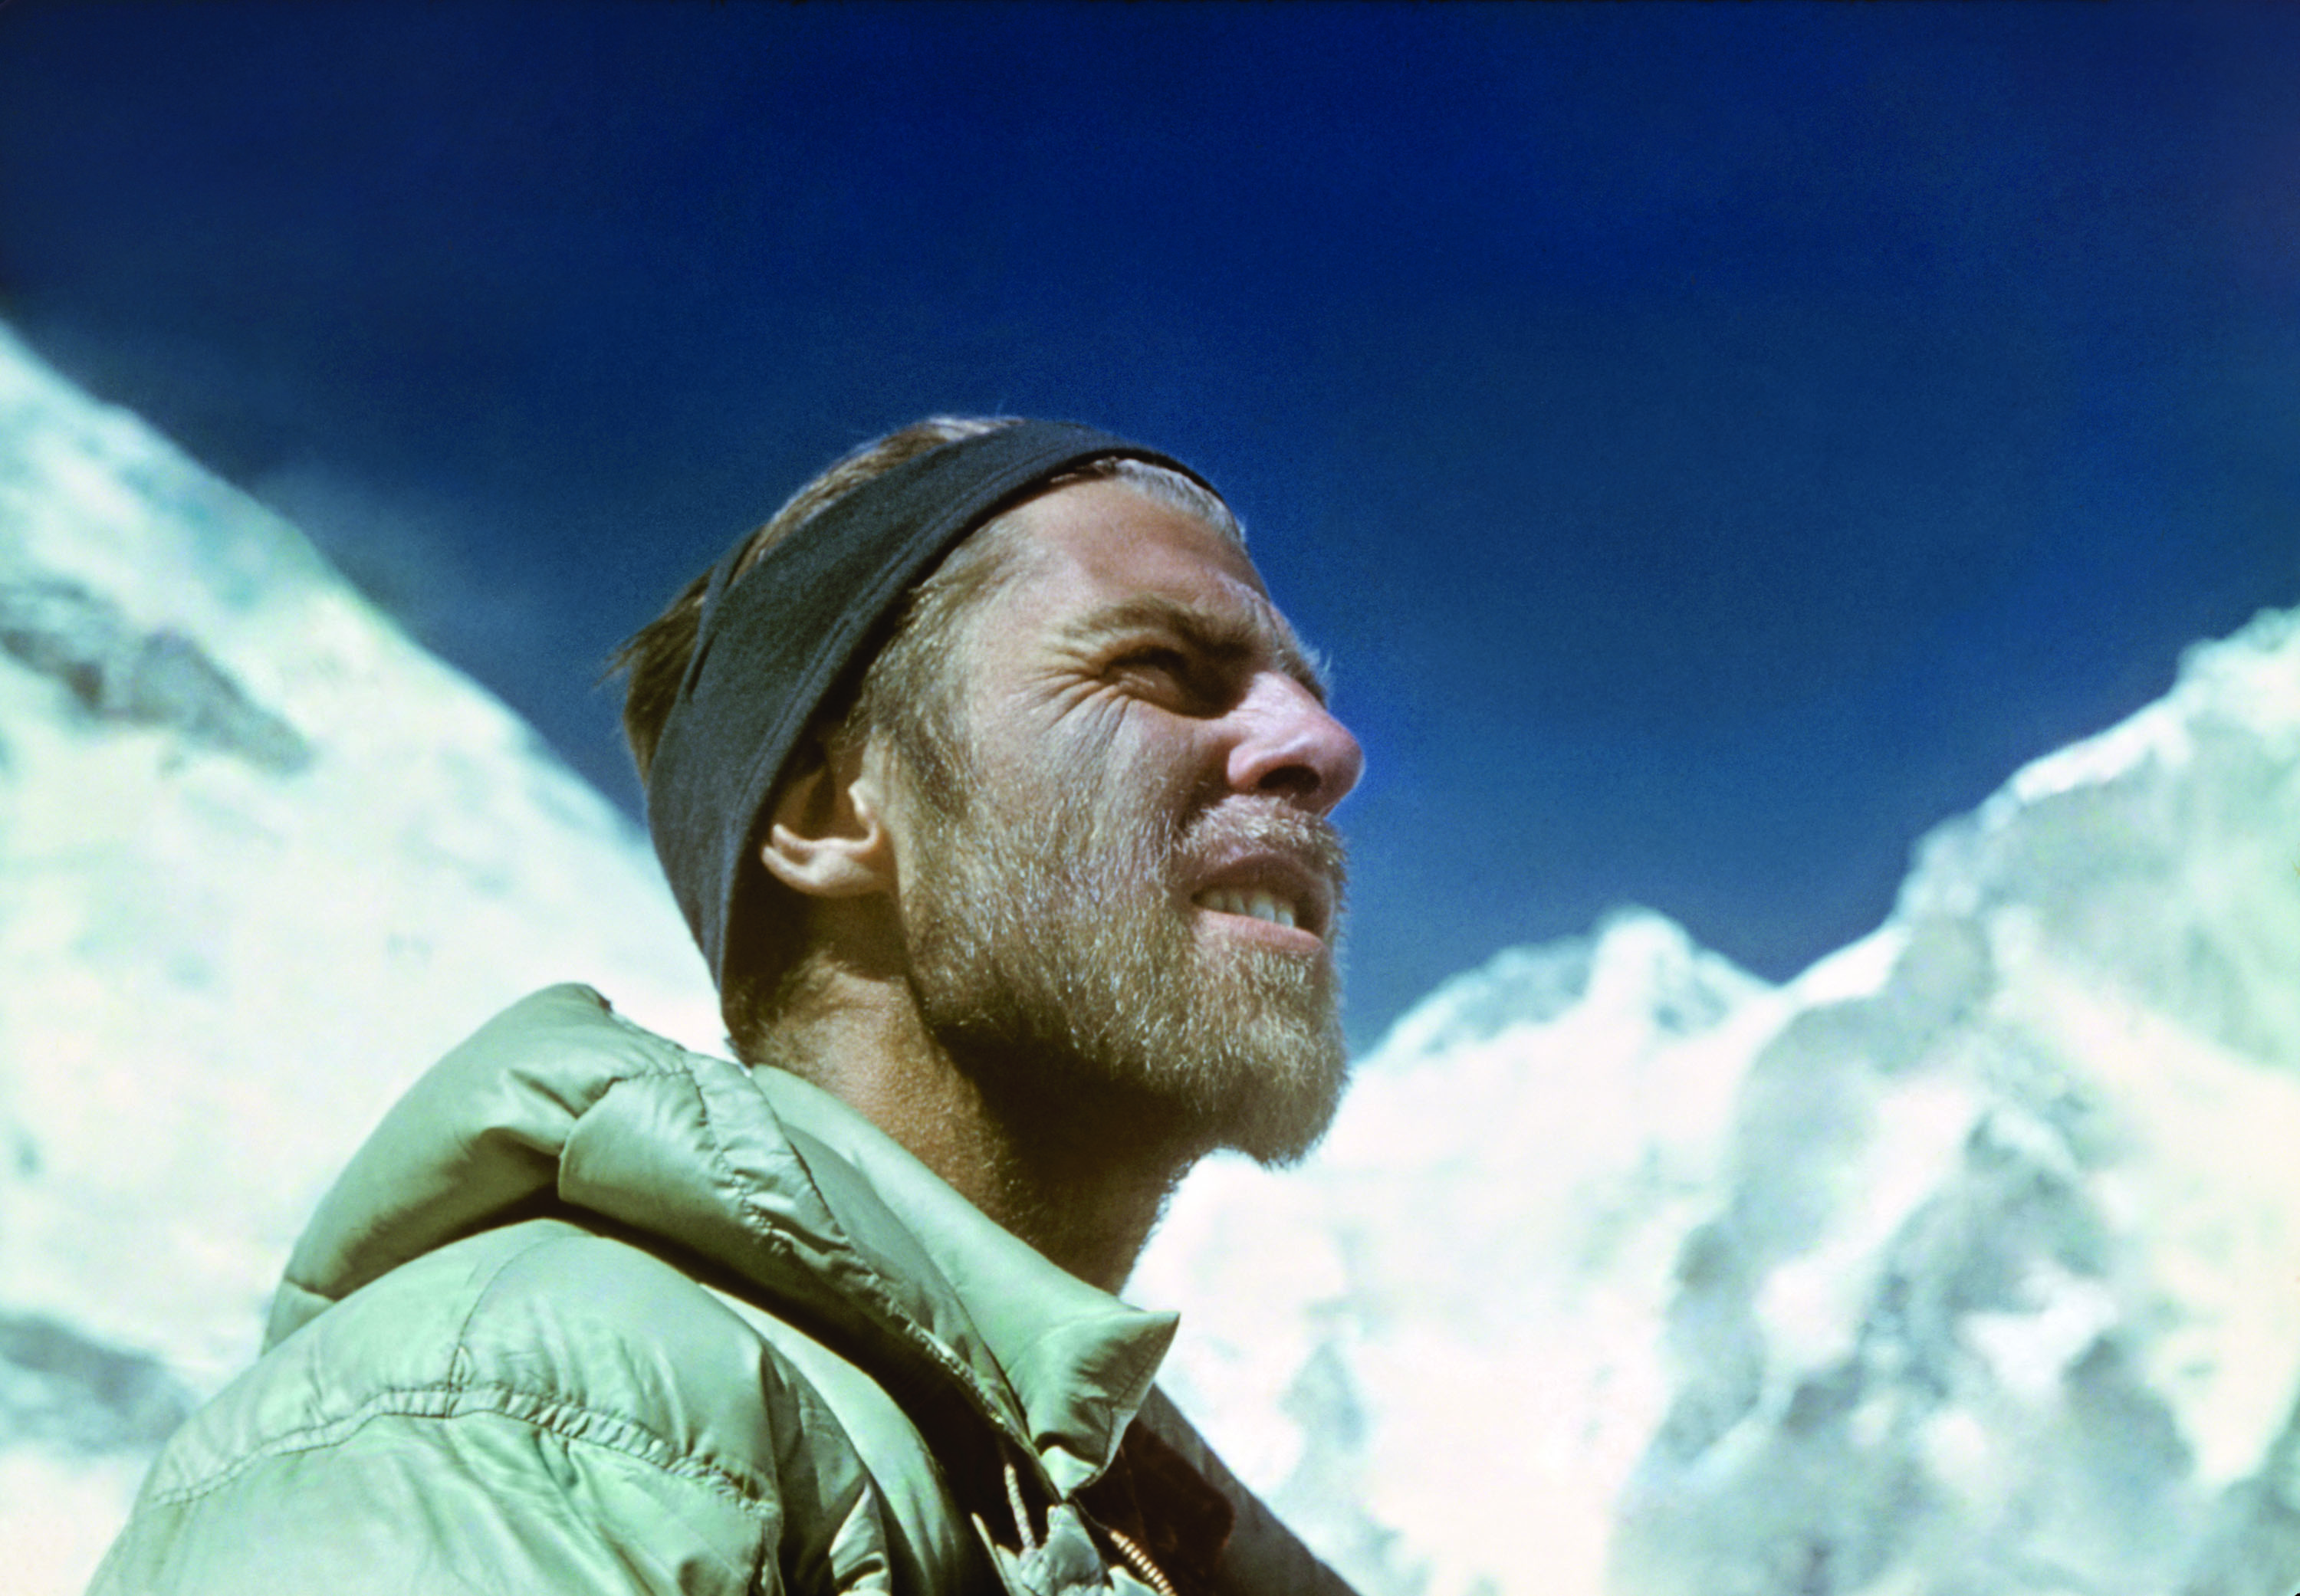 Mountainfilm Presents Dirtbag at Annual December 26 Film Night